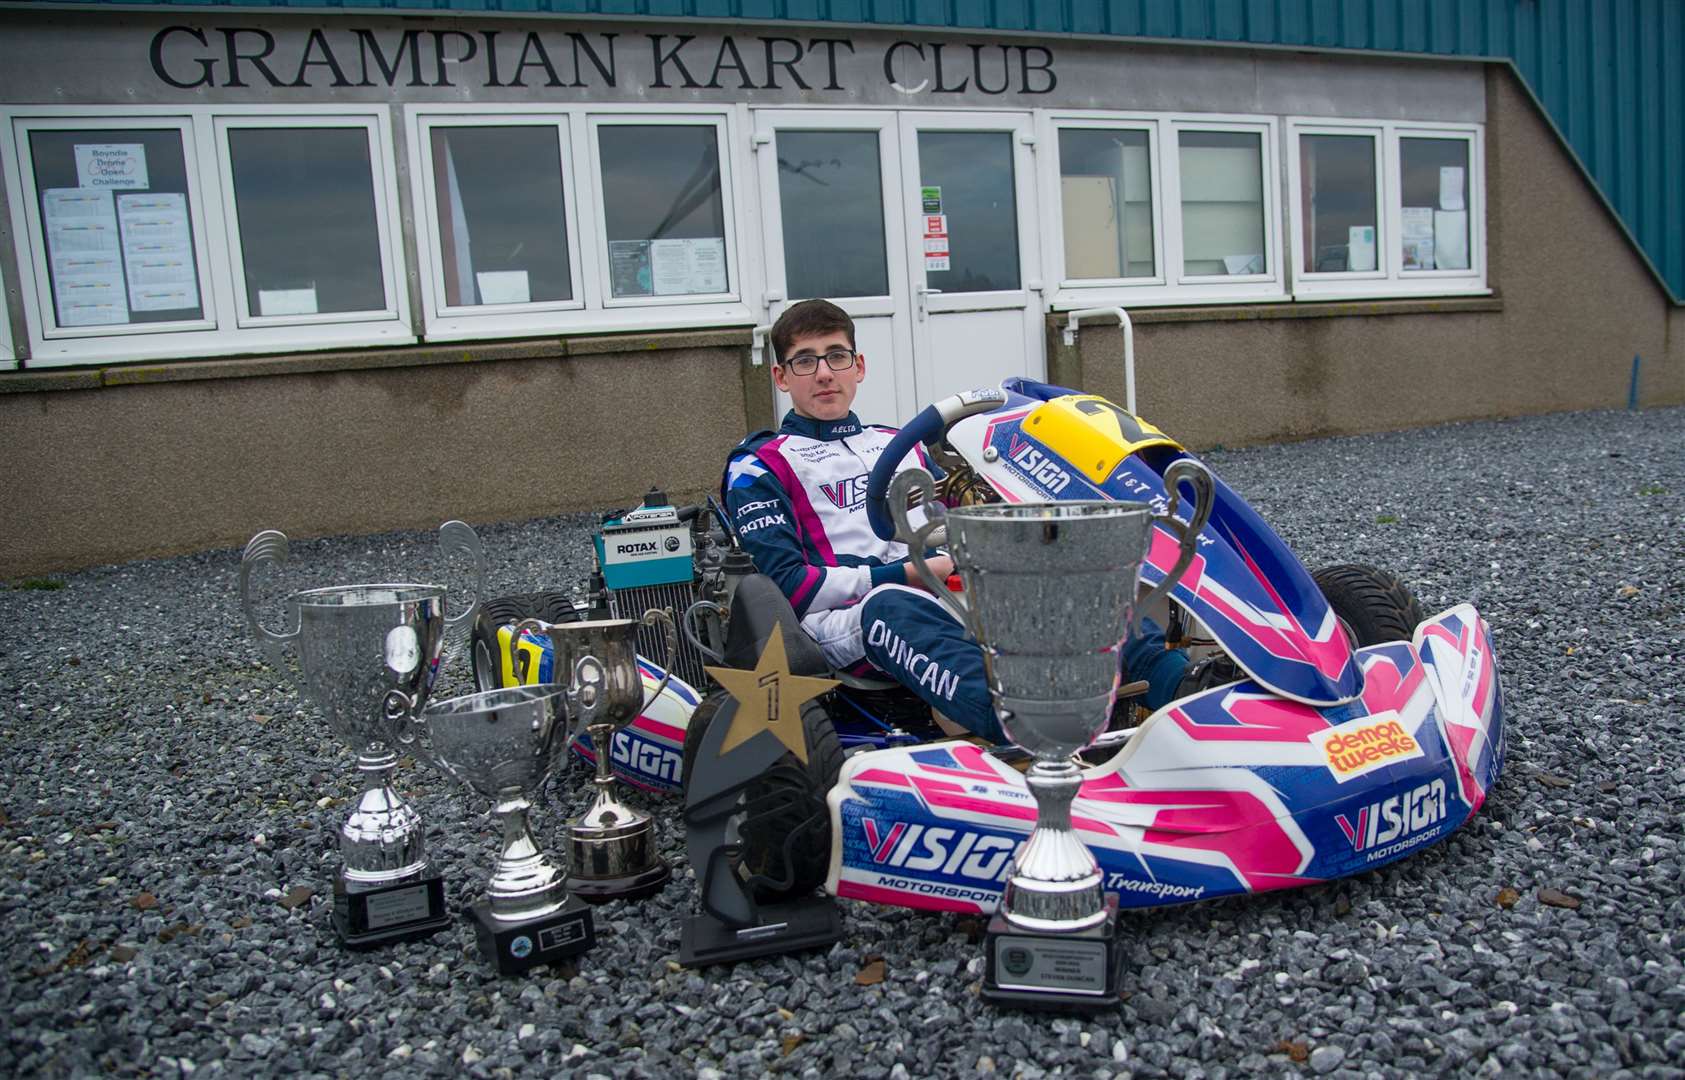 Steven Duncan has become British karting vice-champion and is set to compete in the world finals in Portugal...Picture: Becky Saunderson